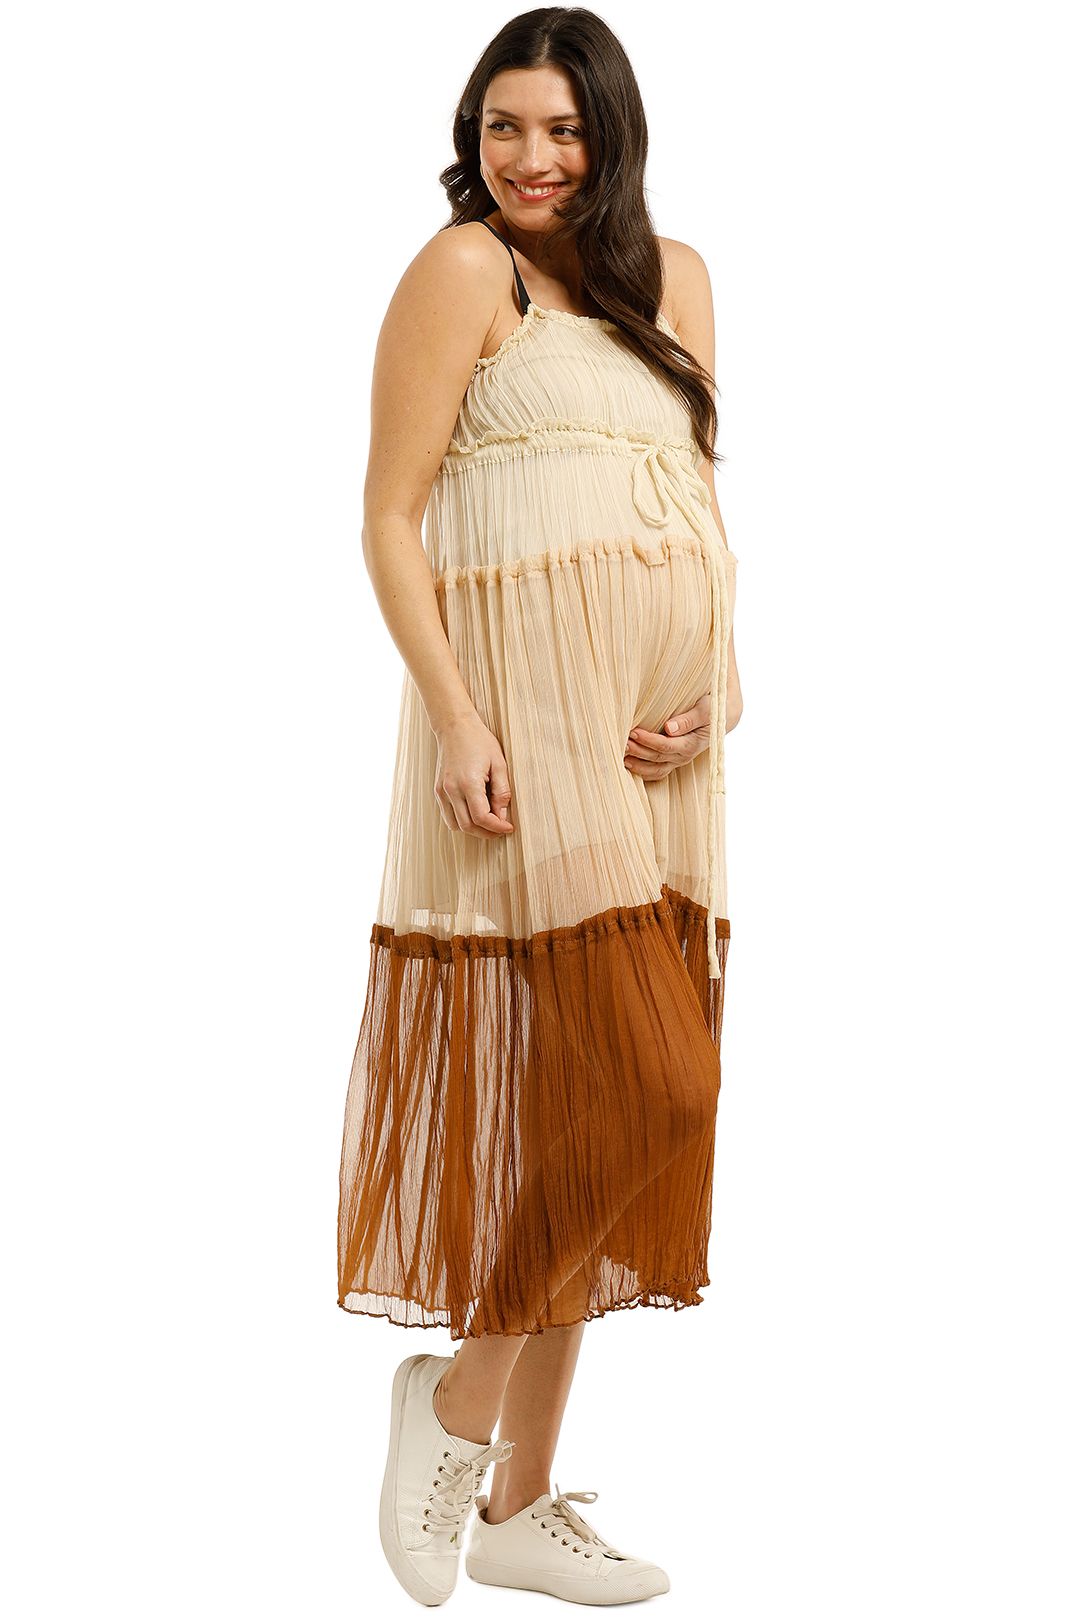 Ministry-of-Style-The-Prairie-Girl-Maxi-Dress-Cinnamon-Side